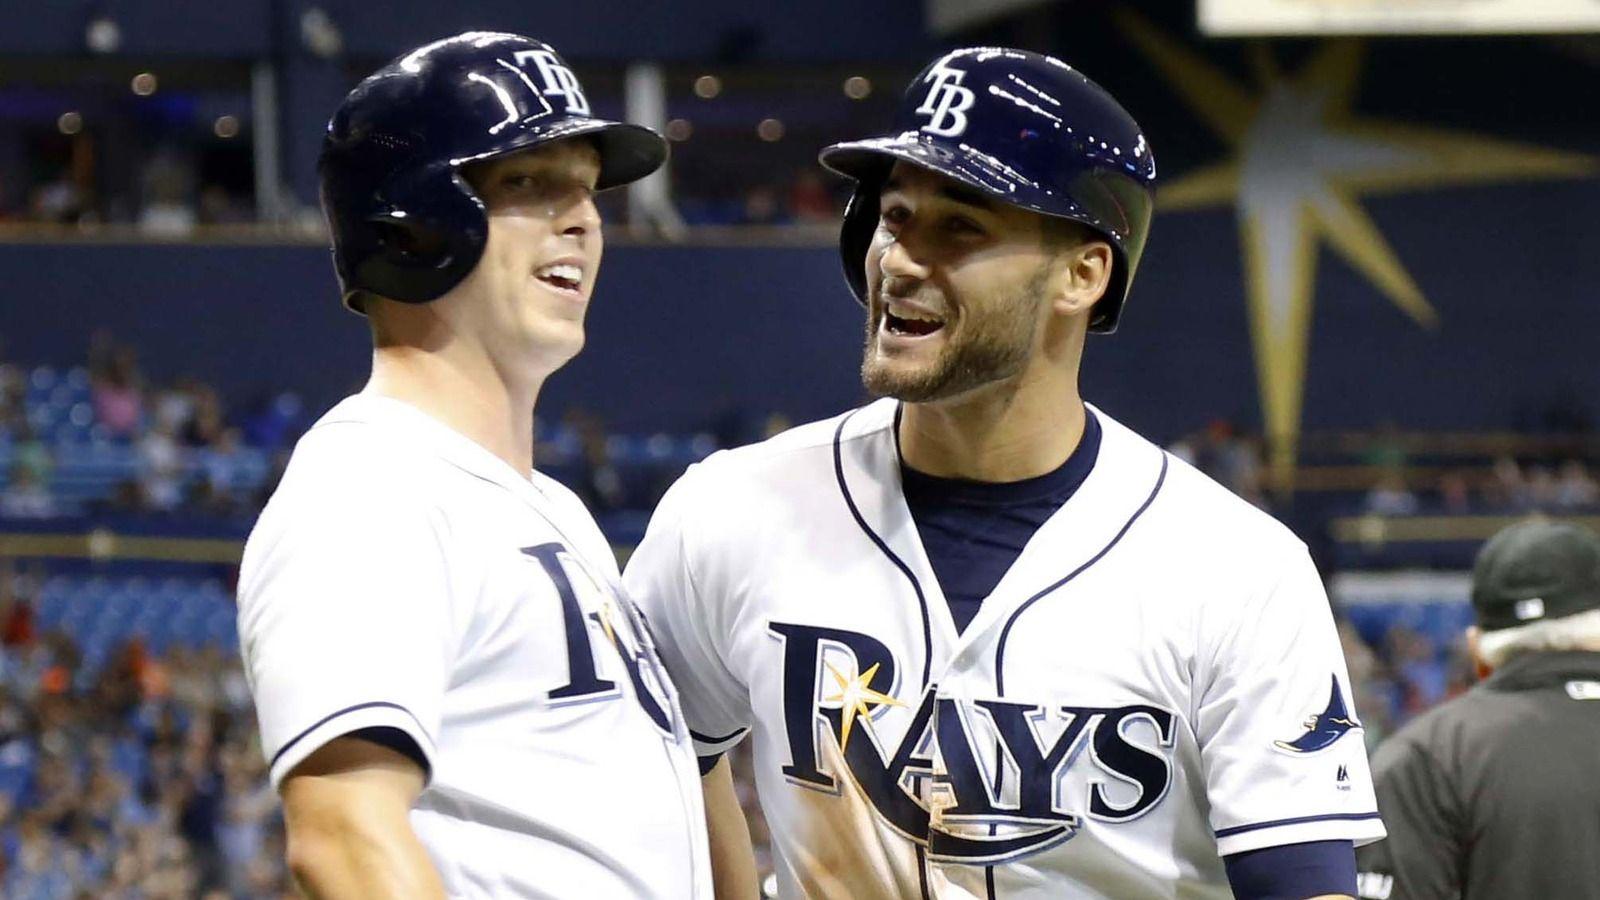 Kevin Kiermaier made arguably the catch of the year, and did so